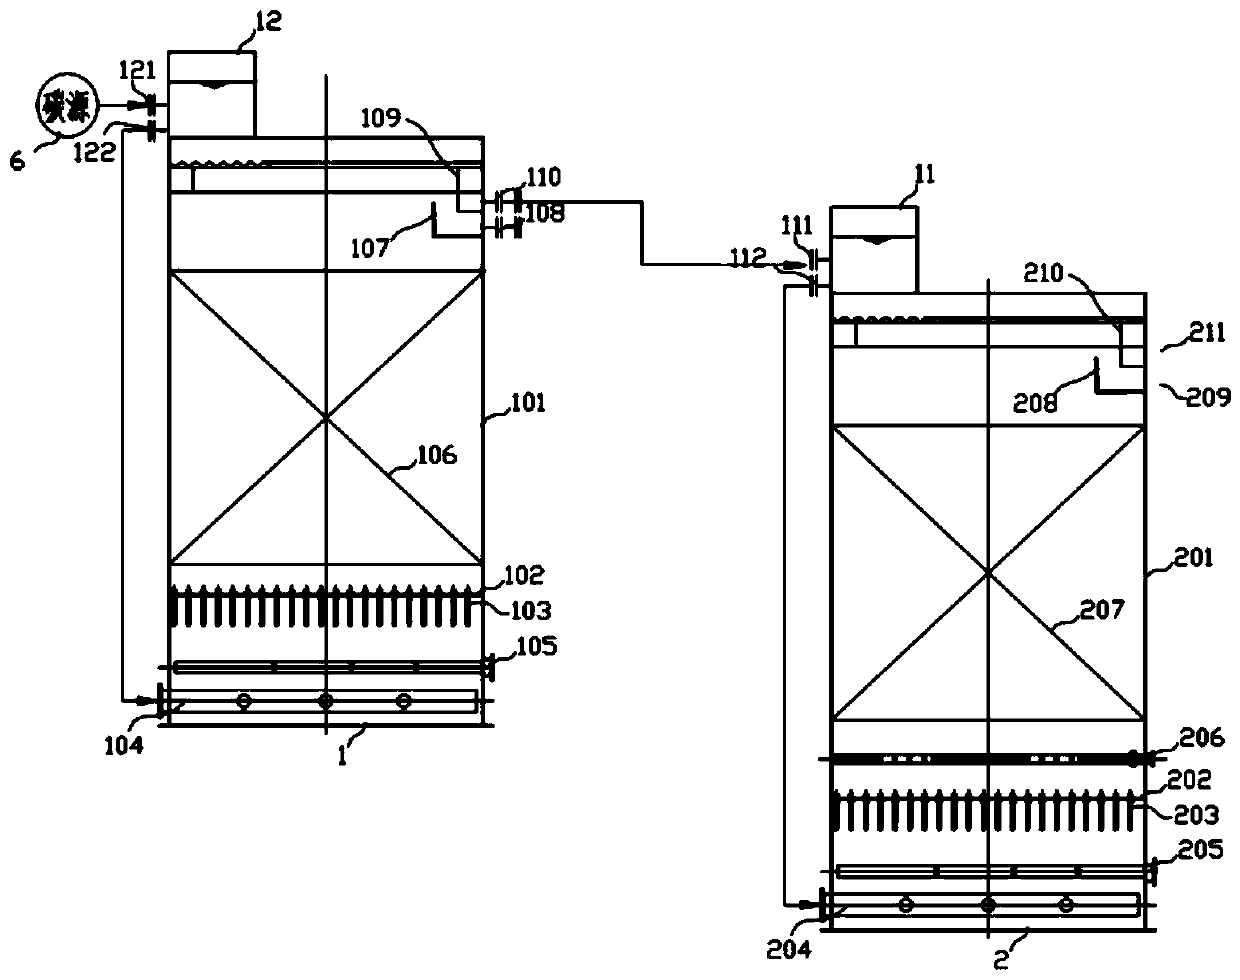 Deep treatment process and device for municipal wastewater treatment upgrading